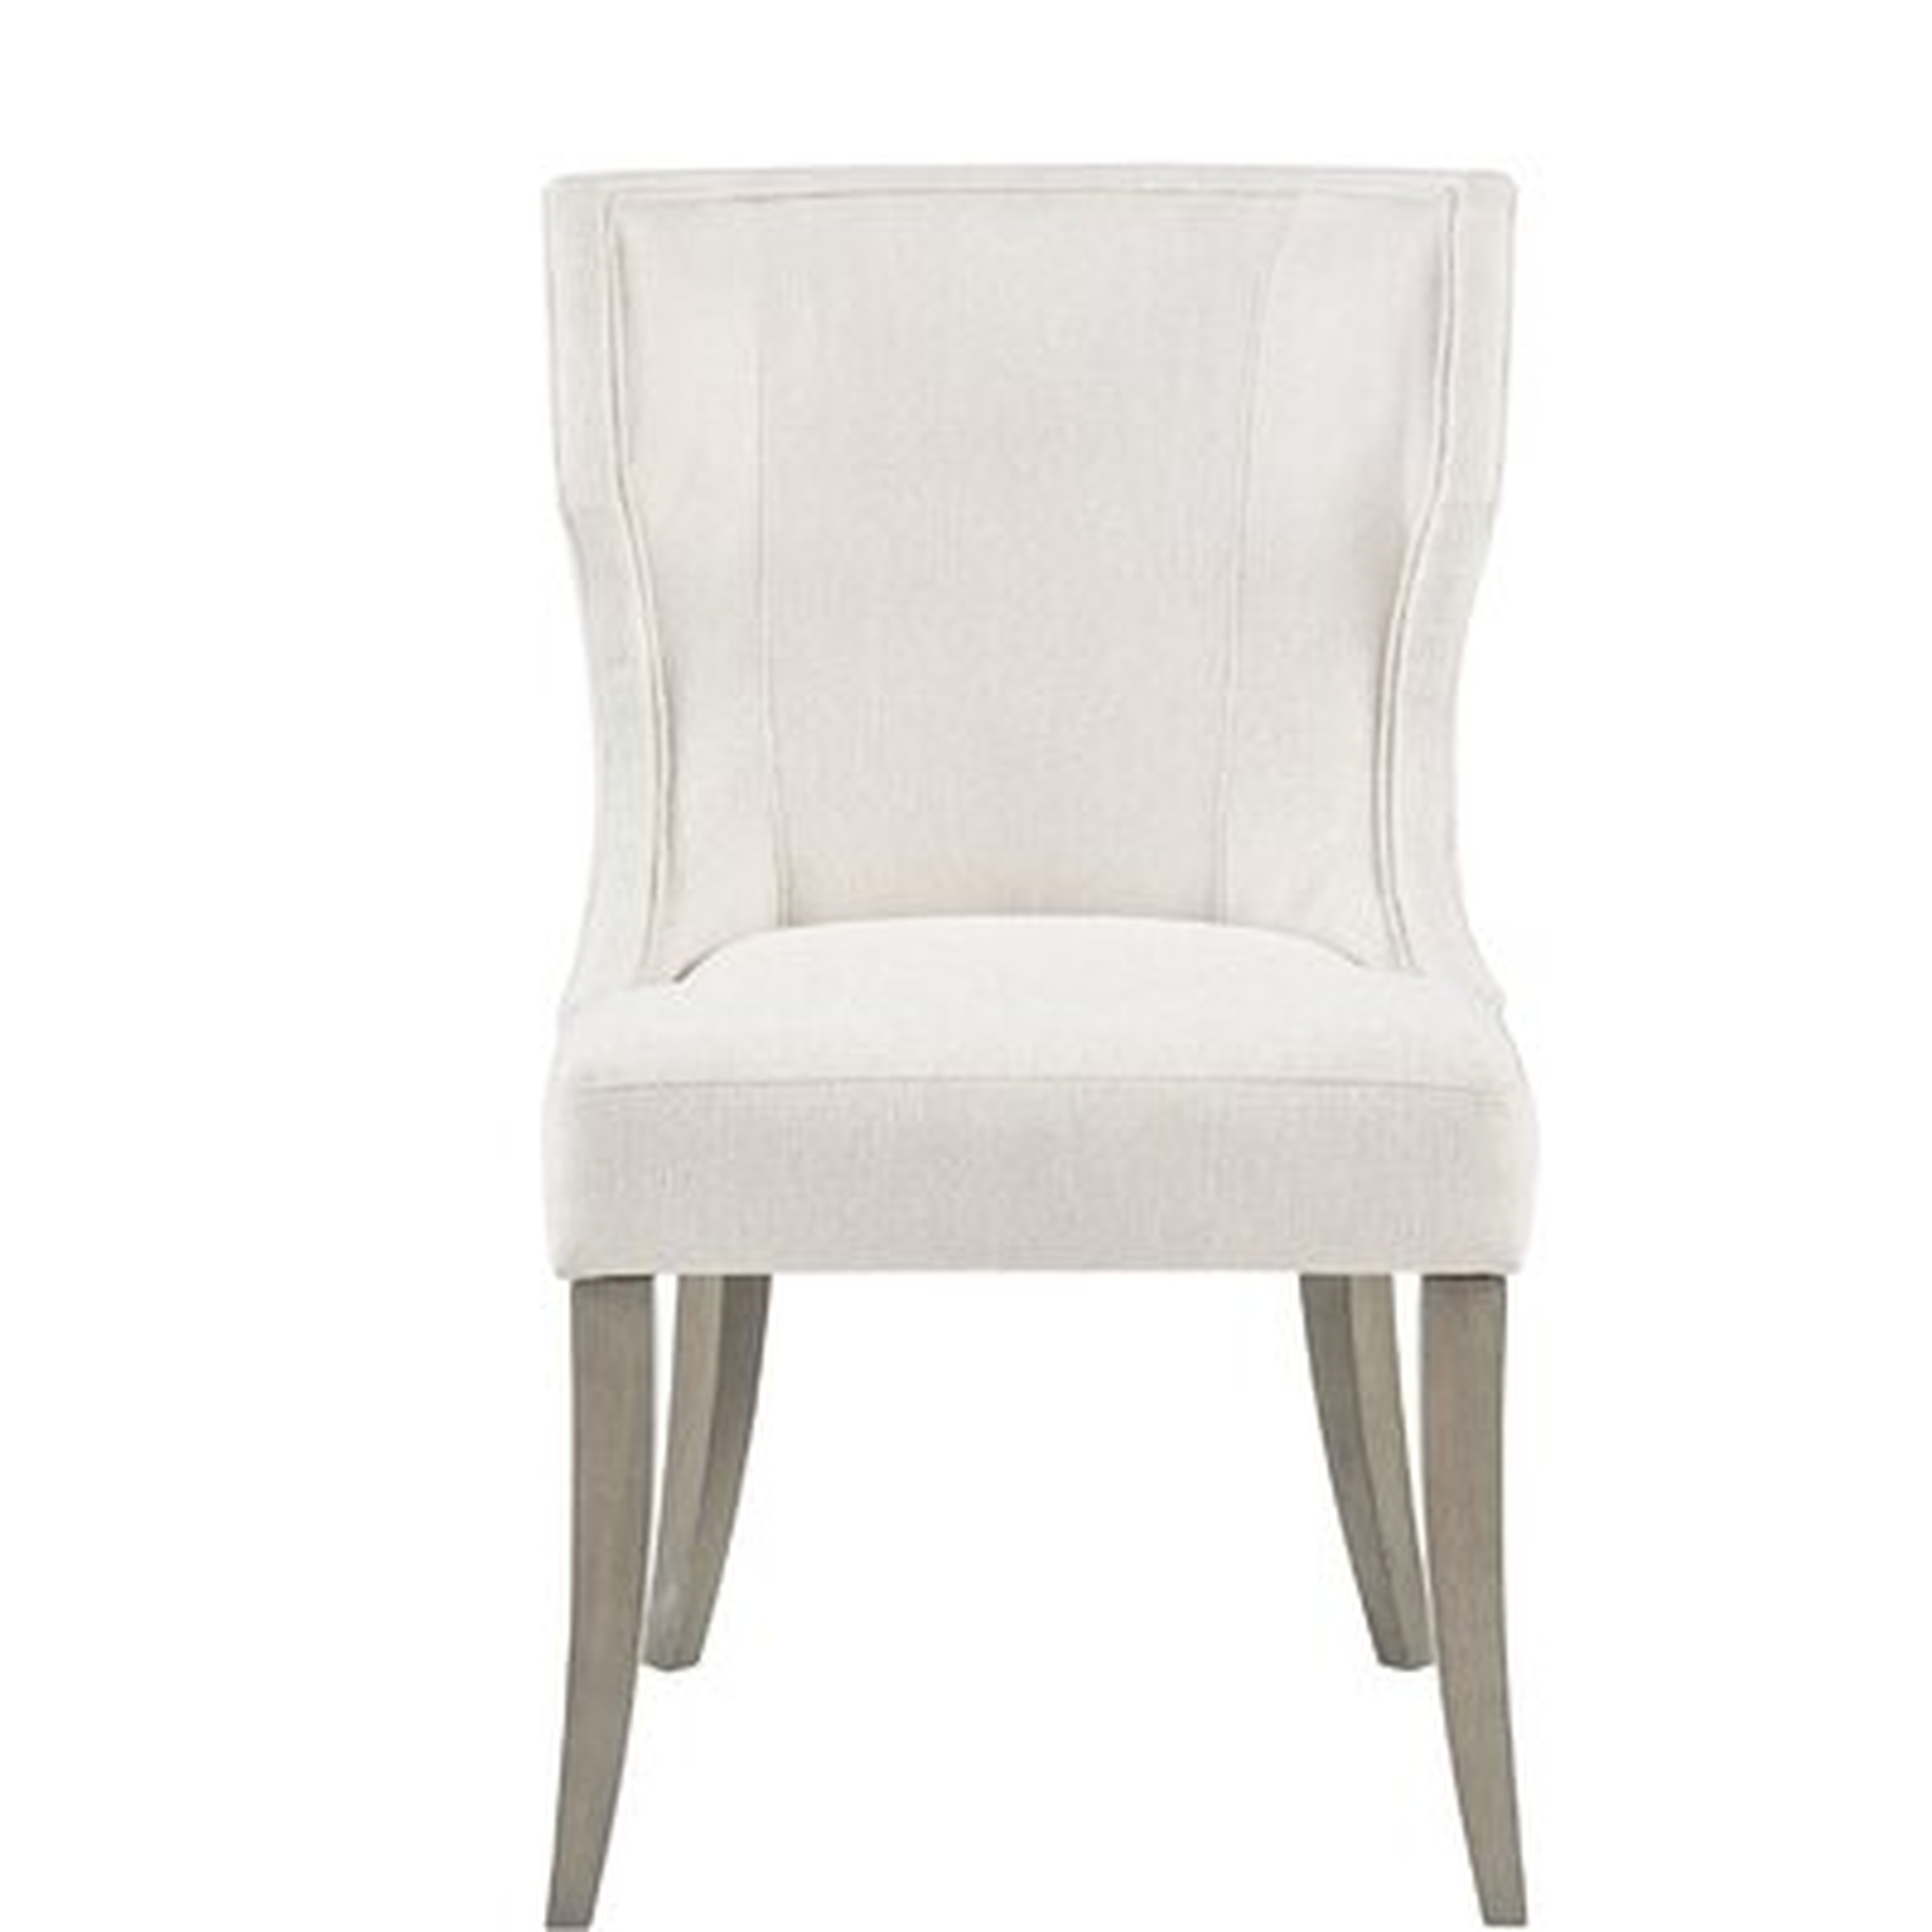 Laflamme Upholstered Dining Chair - Wayfair